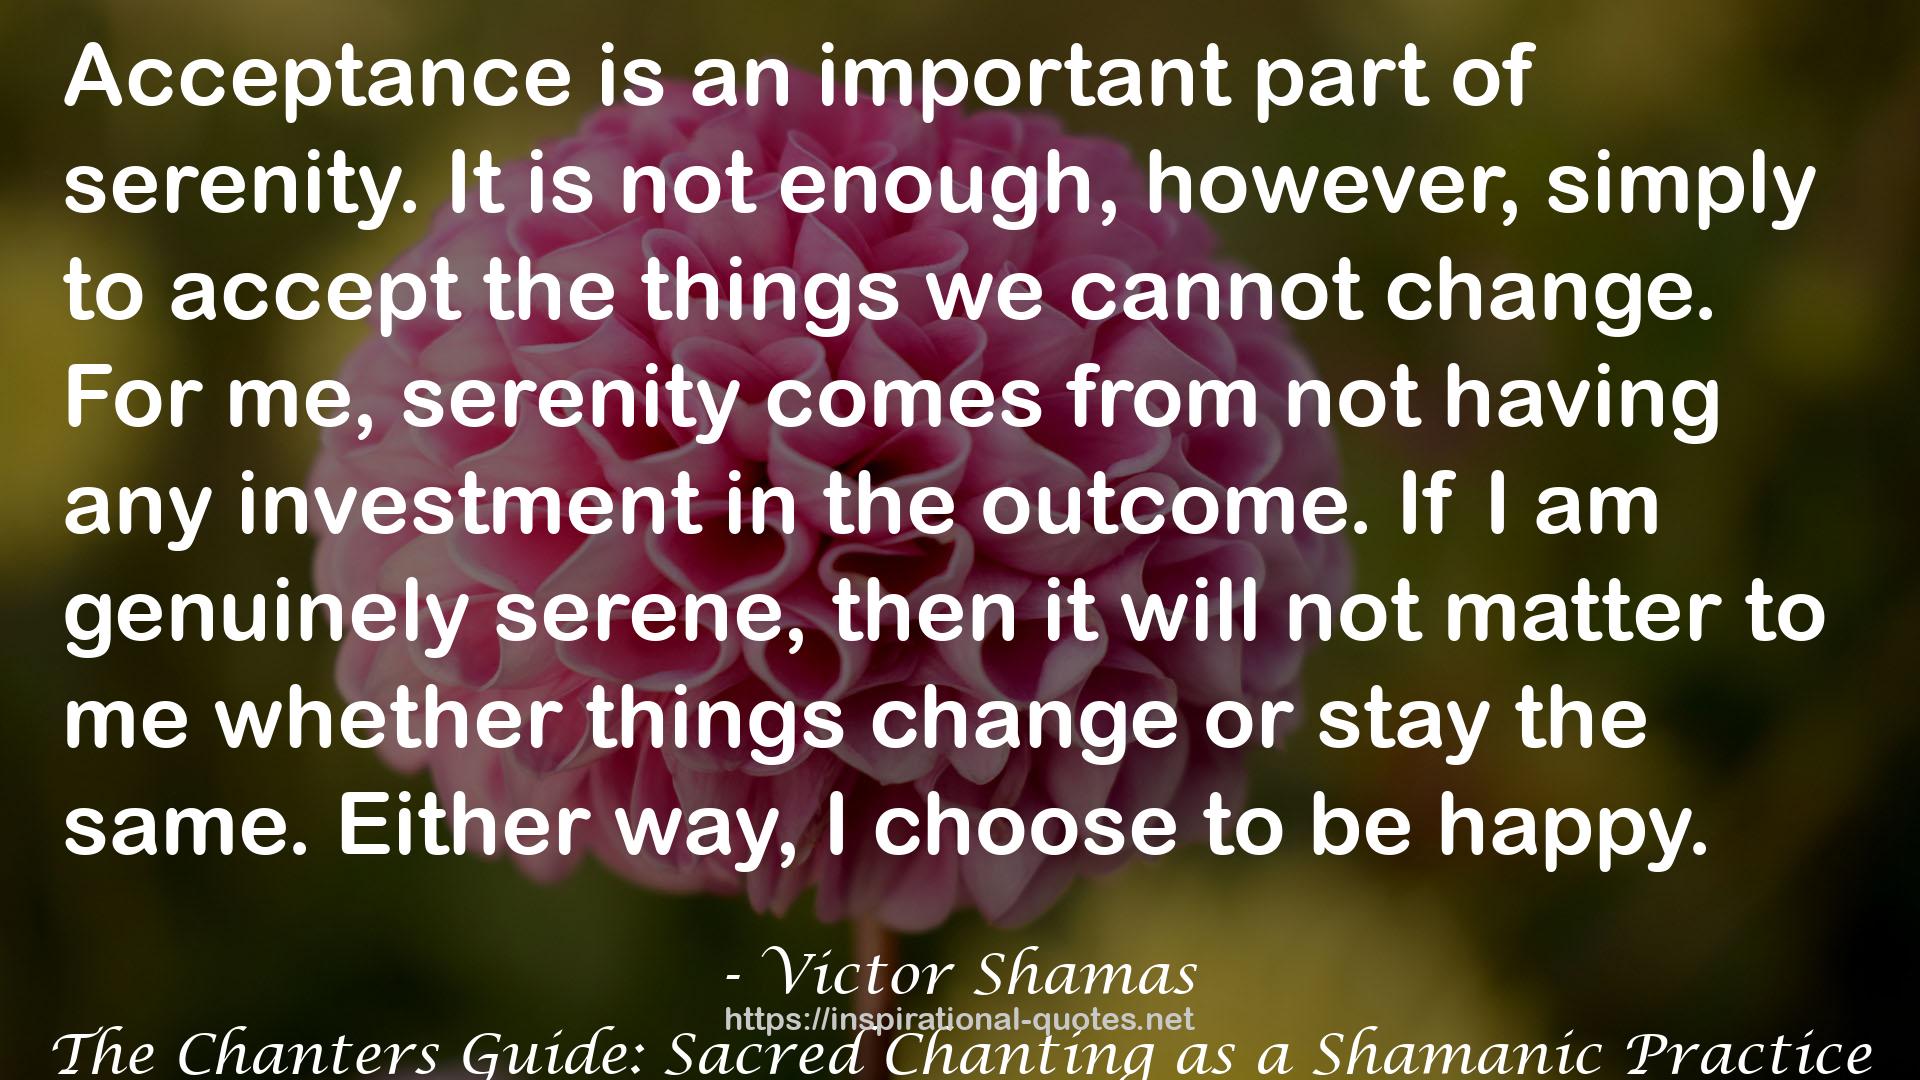 The Chanters Guide: Sacred Chanting as a Shamanic Practice QUOTES